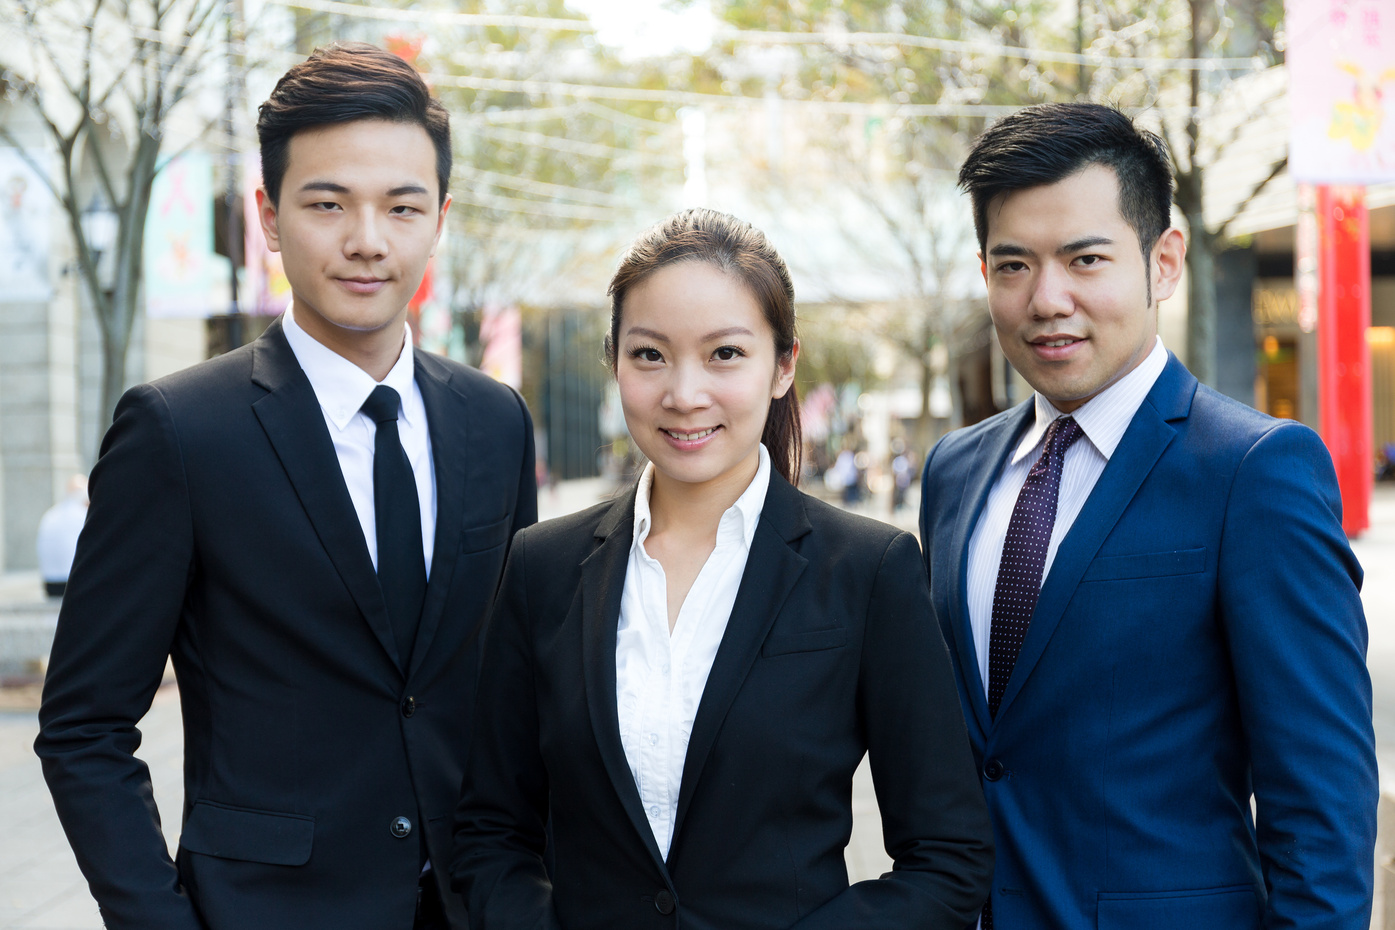 Group of Asian Business People